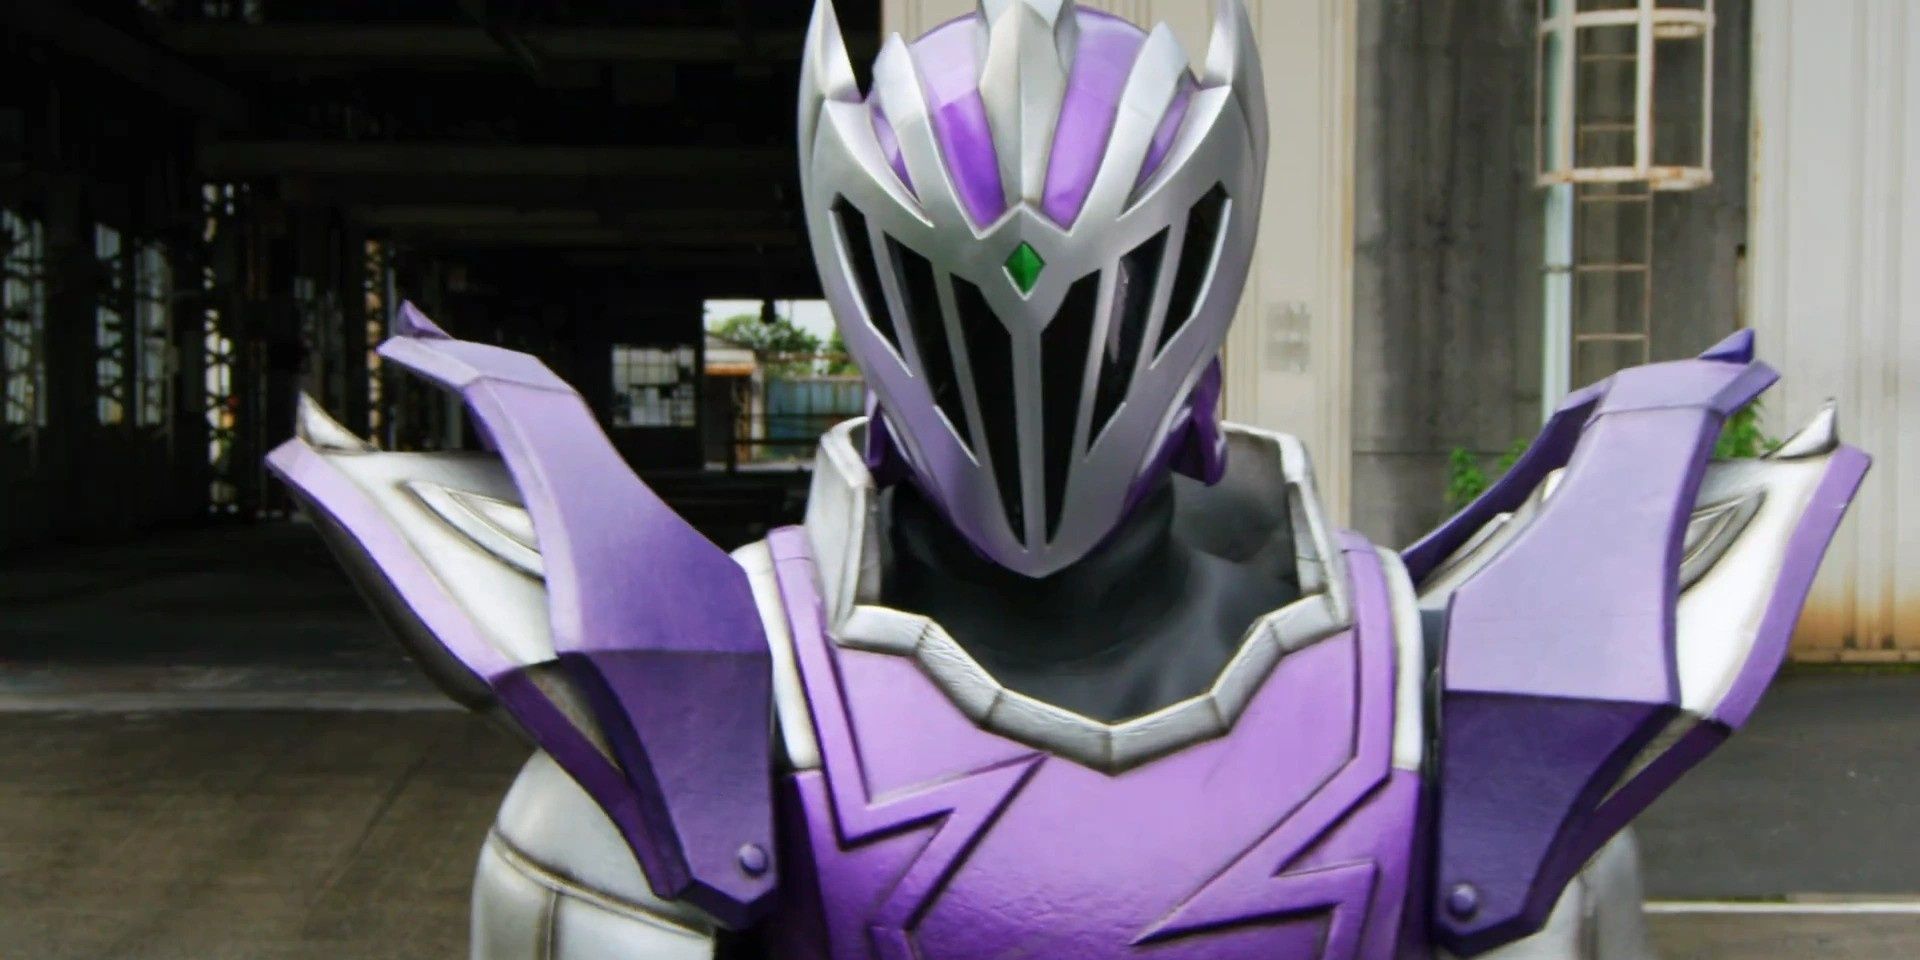 void-knight-power-rangers Cropped